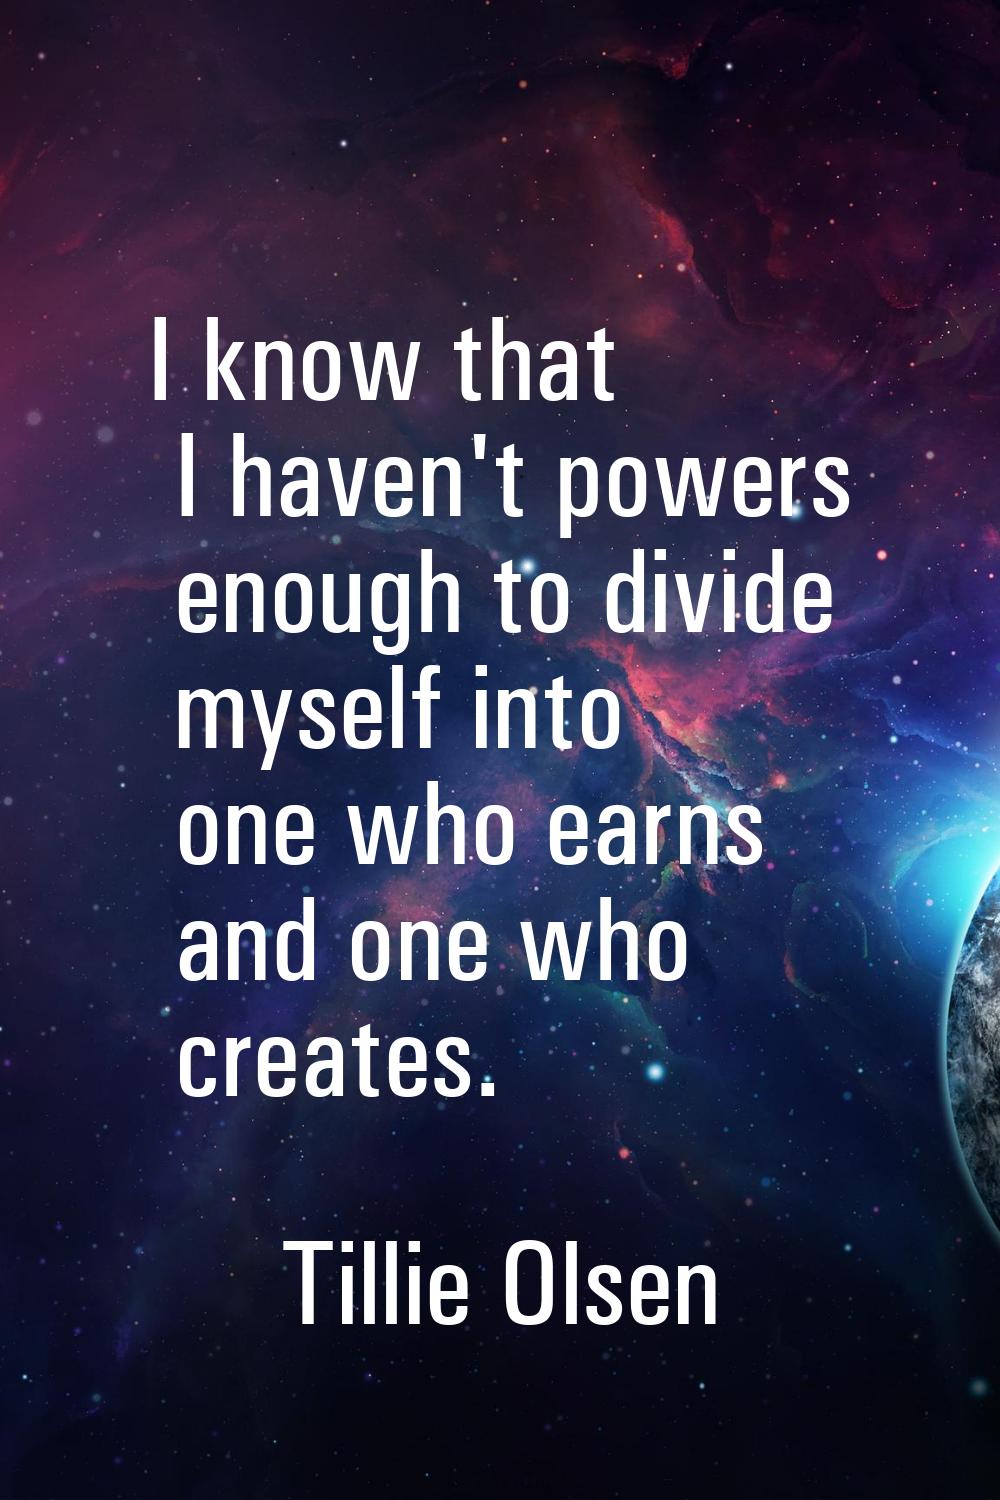 I know that I haven't powers enough to divide myself into one who earns and one who creates.